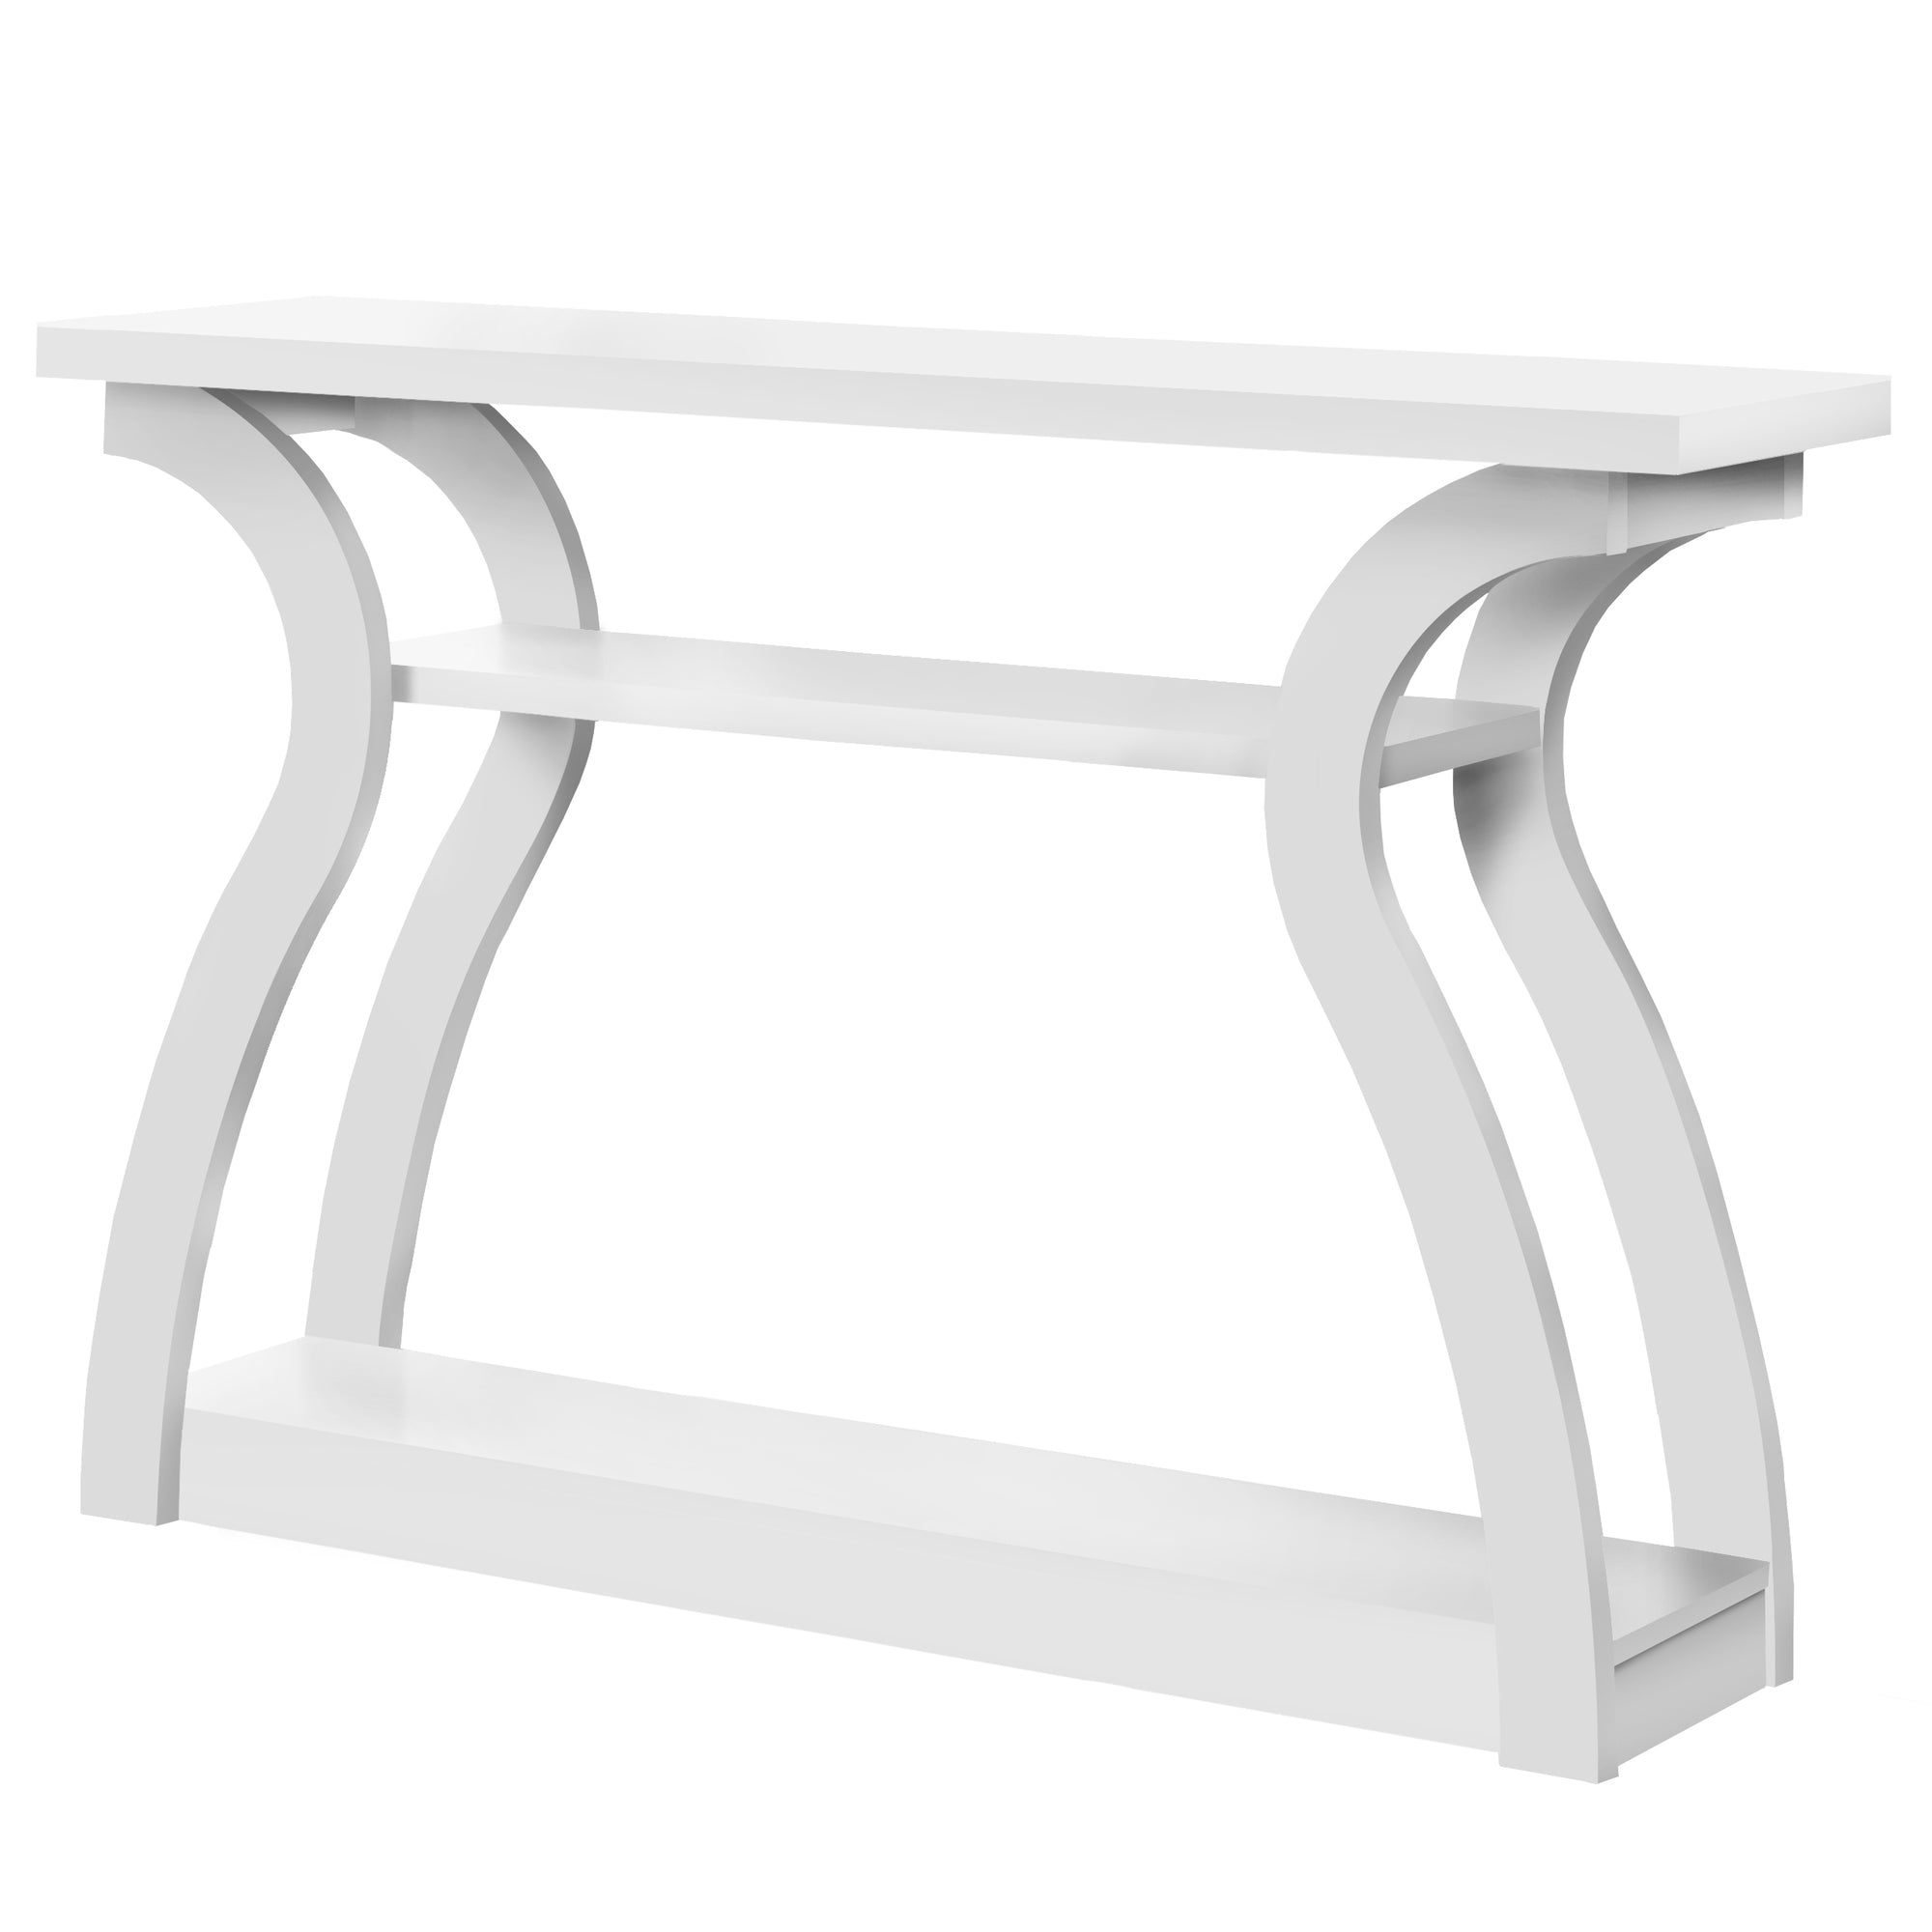 MN-202438    Accent Table, Console, Entryway, Narrow, Sofa, Living Room, Bedroom, Laminate, White, White, Contemporary, Modern